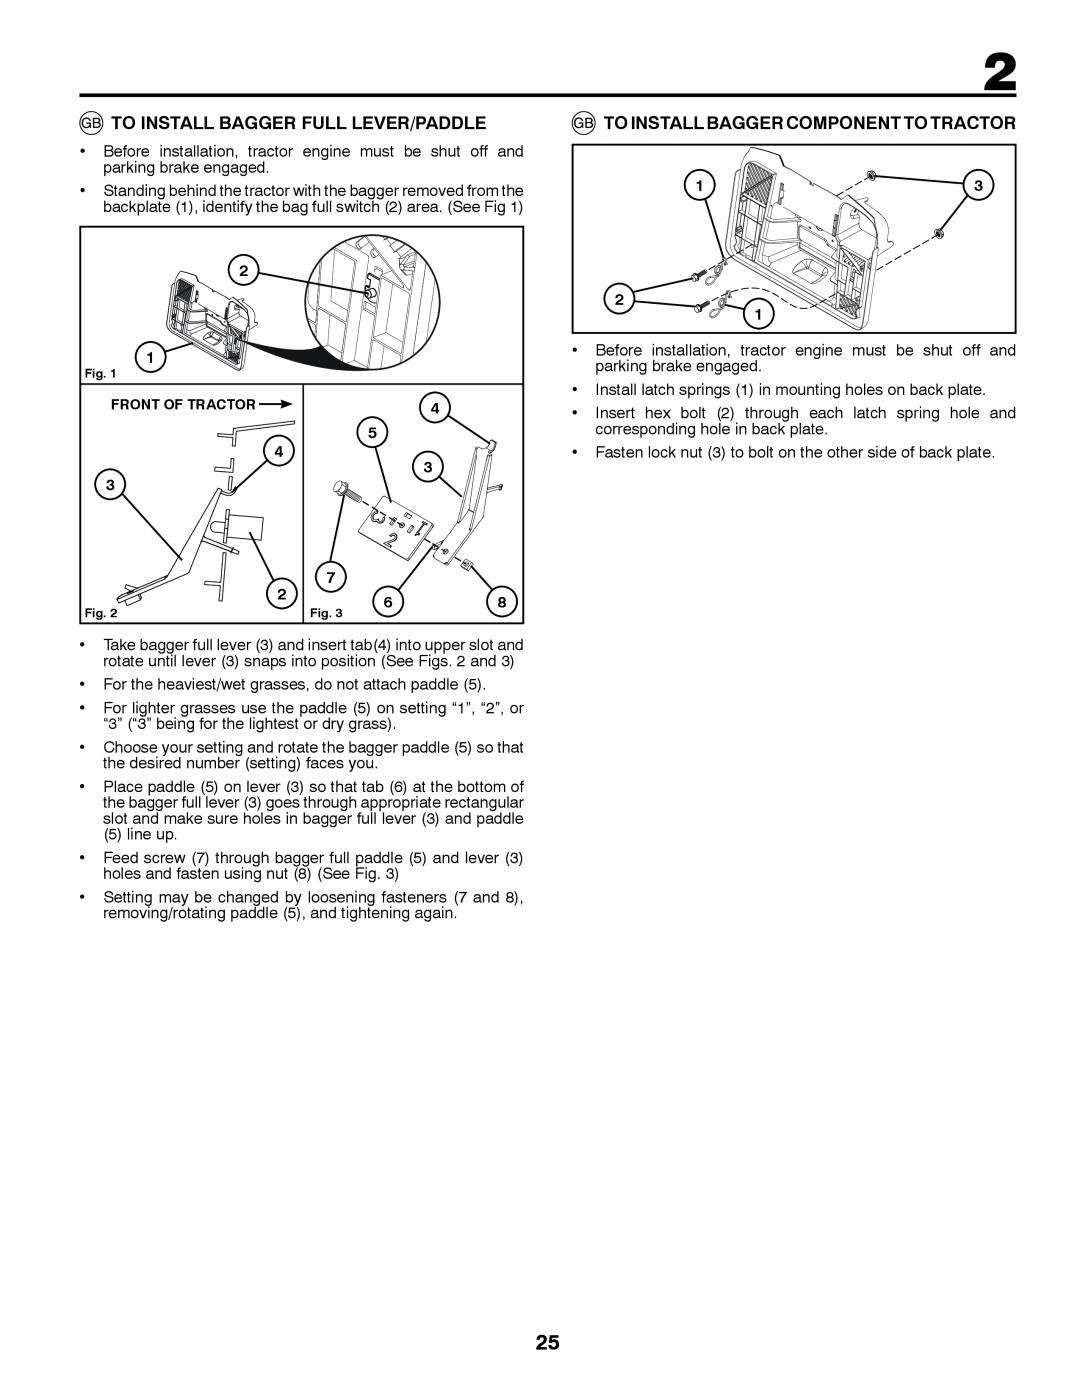 Jonsered LT2213C instruction manual To Install Bagger Full Lever/Paddle, To Install Bagger Component To Tractor 